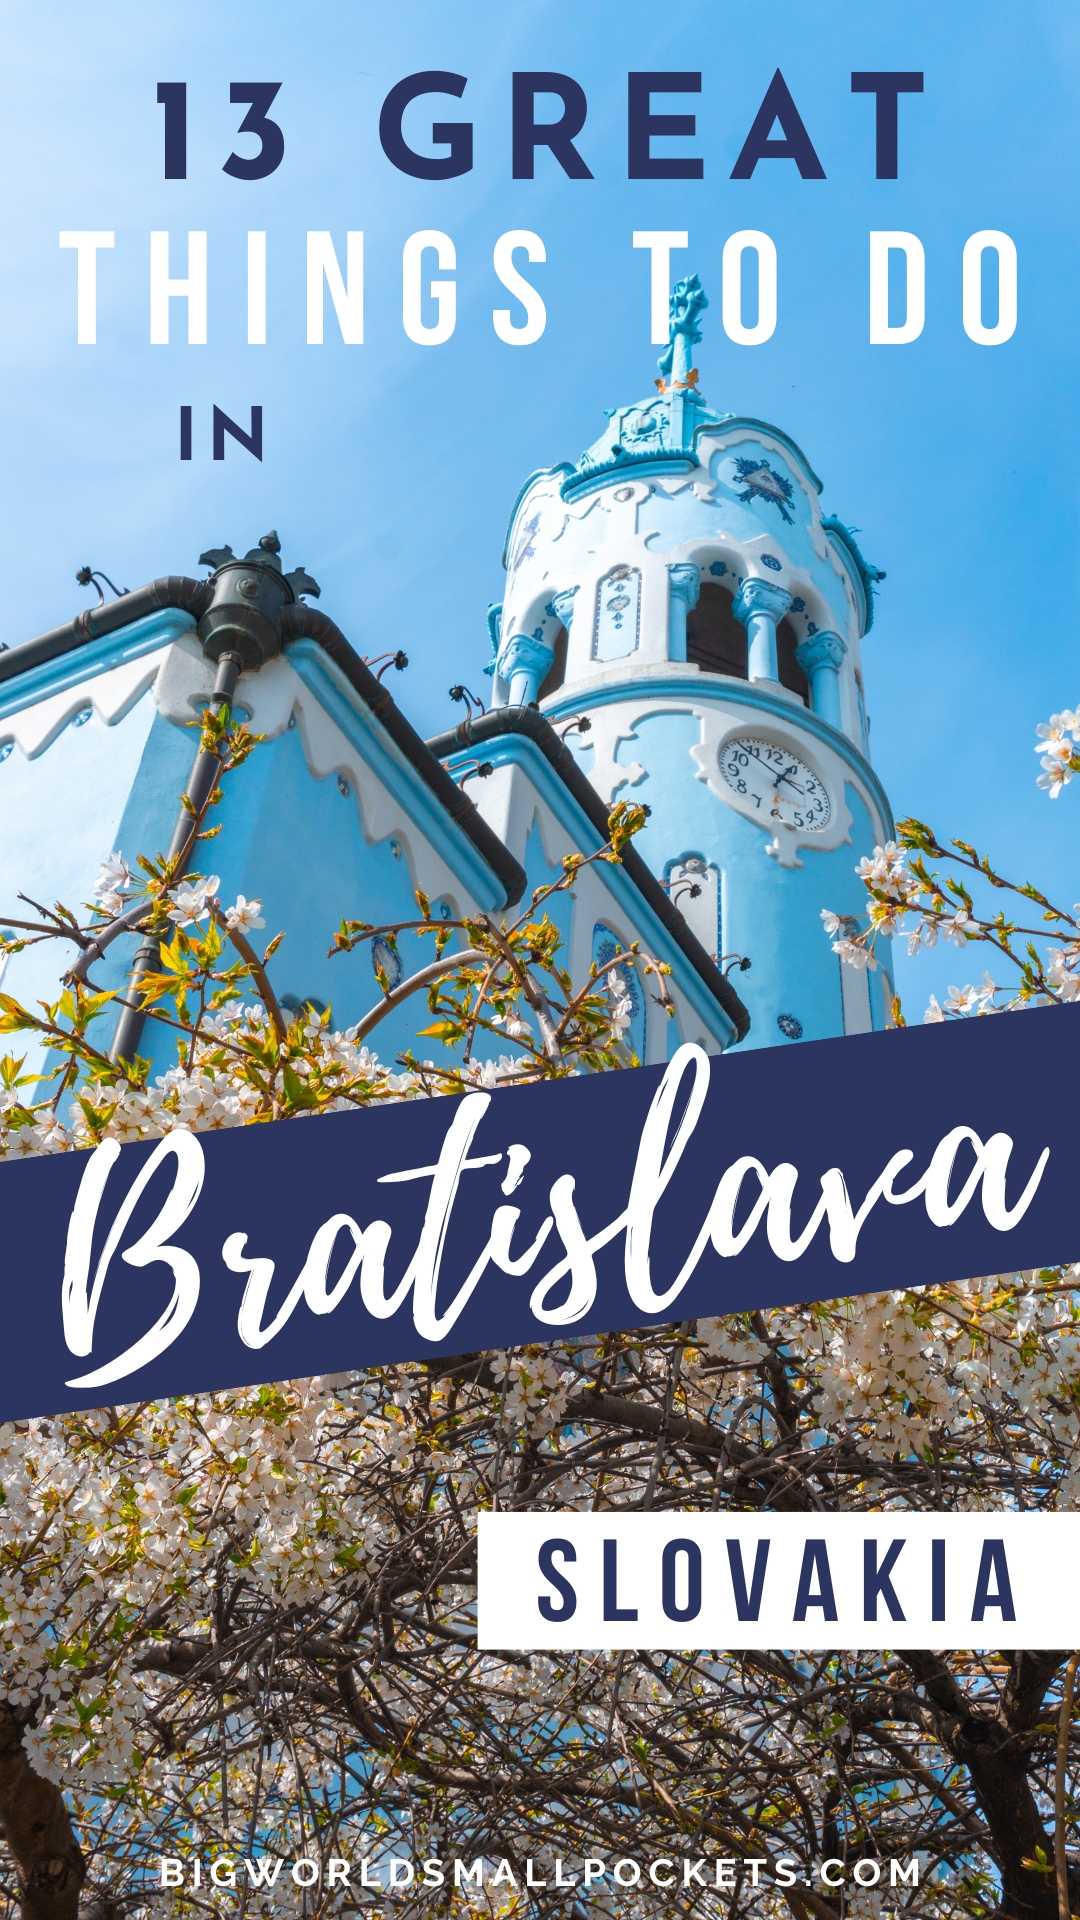 13 Great Things to Do in Bratislava, Slovakia